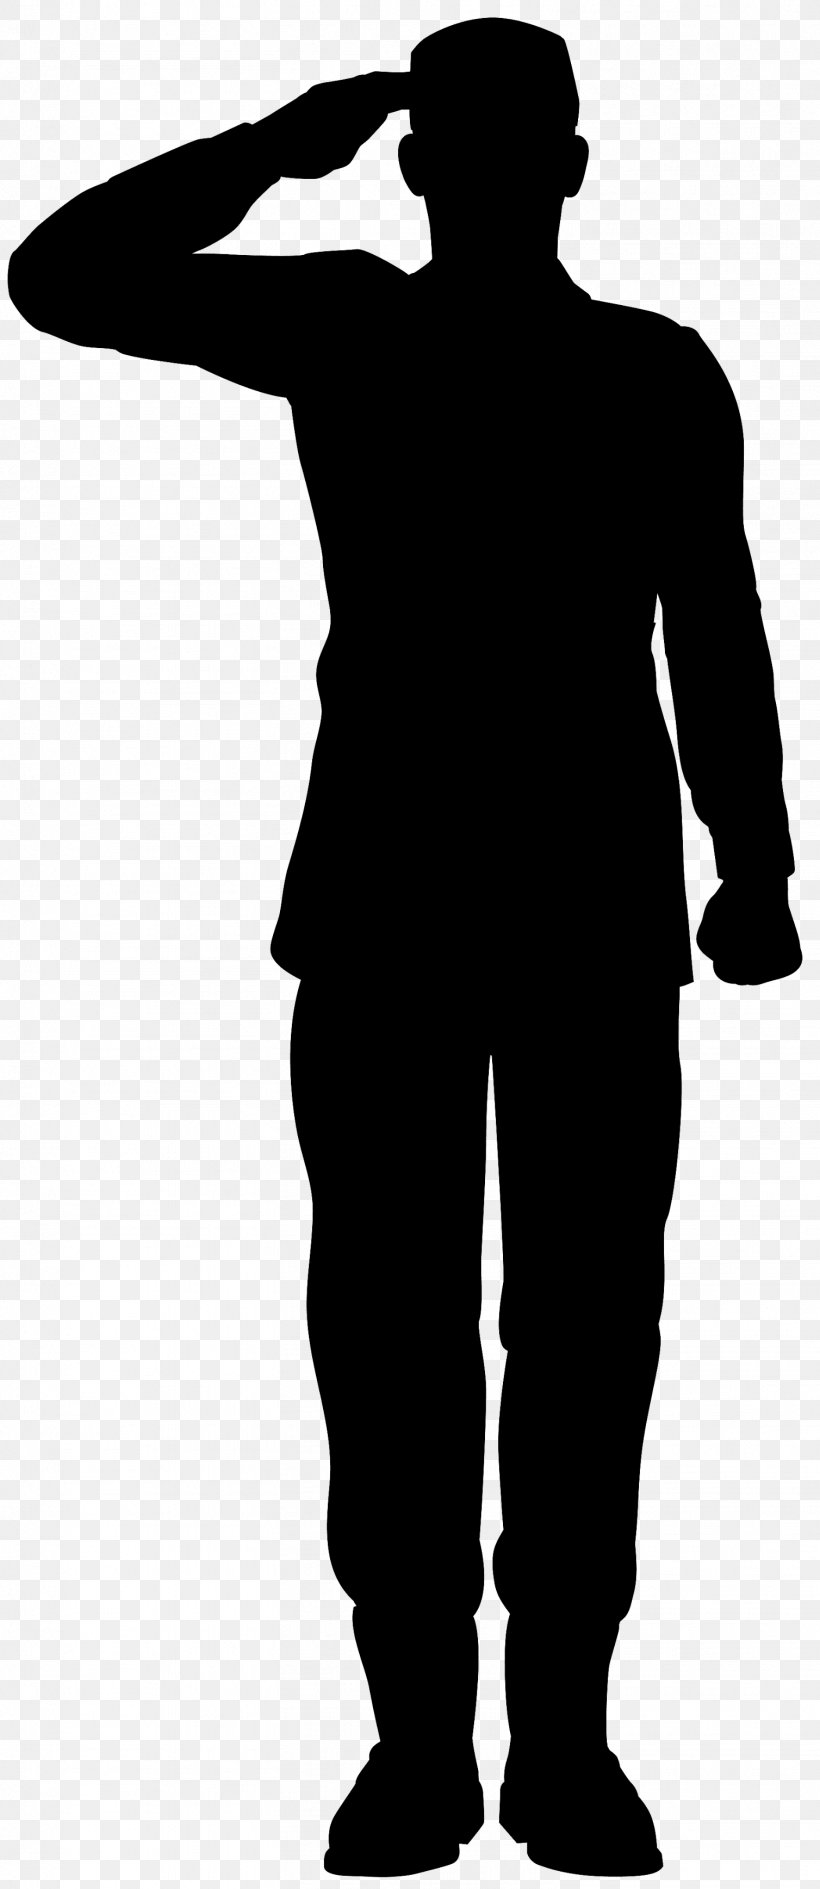 Soldier Silhouette, PNG, 1508x3474px, Soldier, Army, Black, Blackandwhite, Formal Wear Download Free